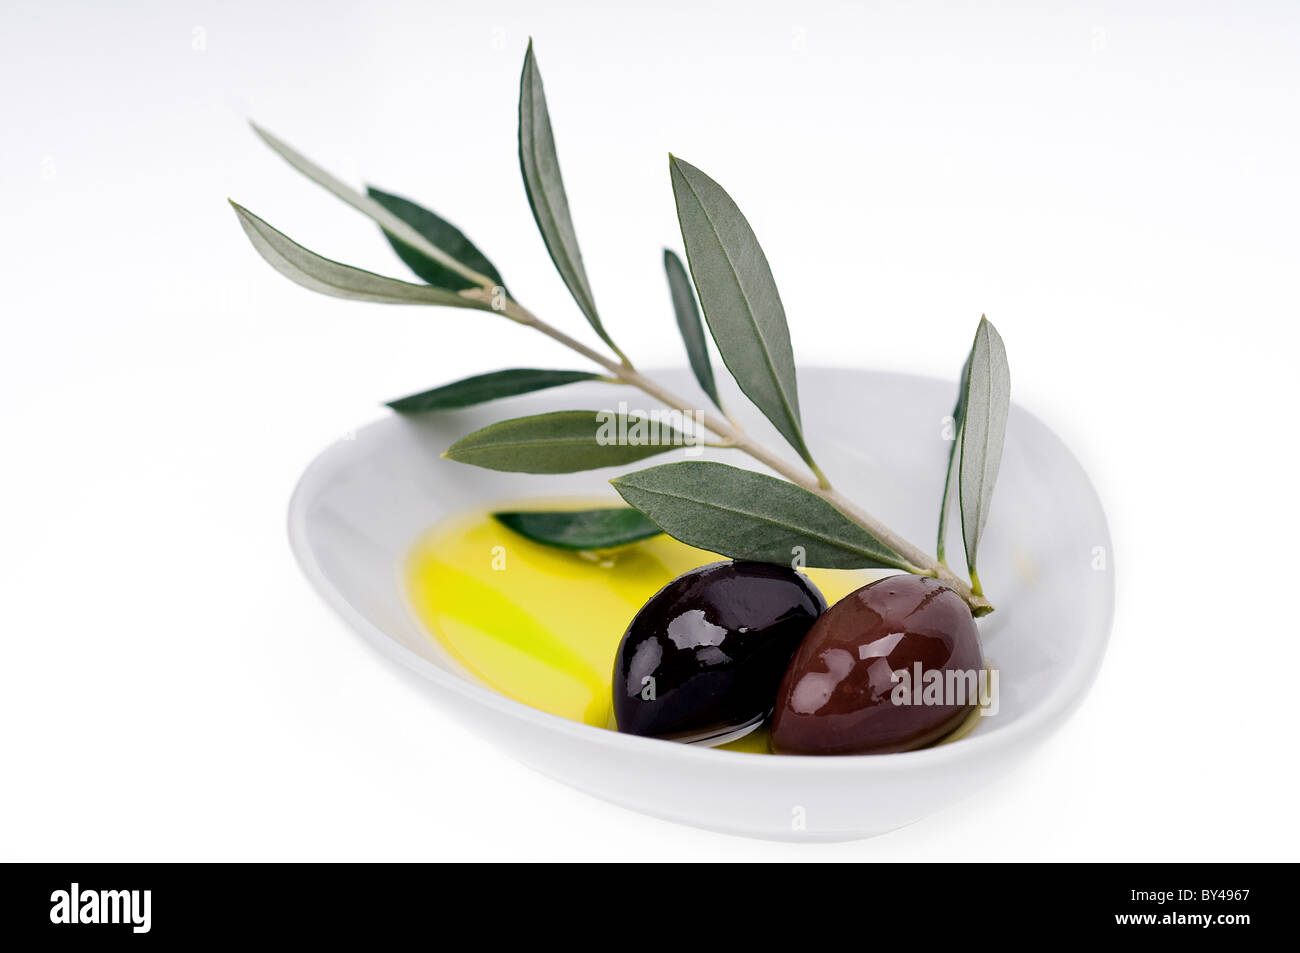 Plate with two black olives kalamon ( Kalamata) on branch and white background Stock Photo